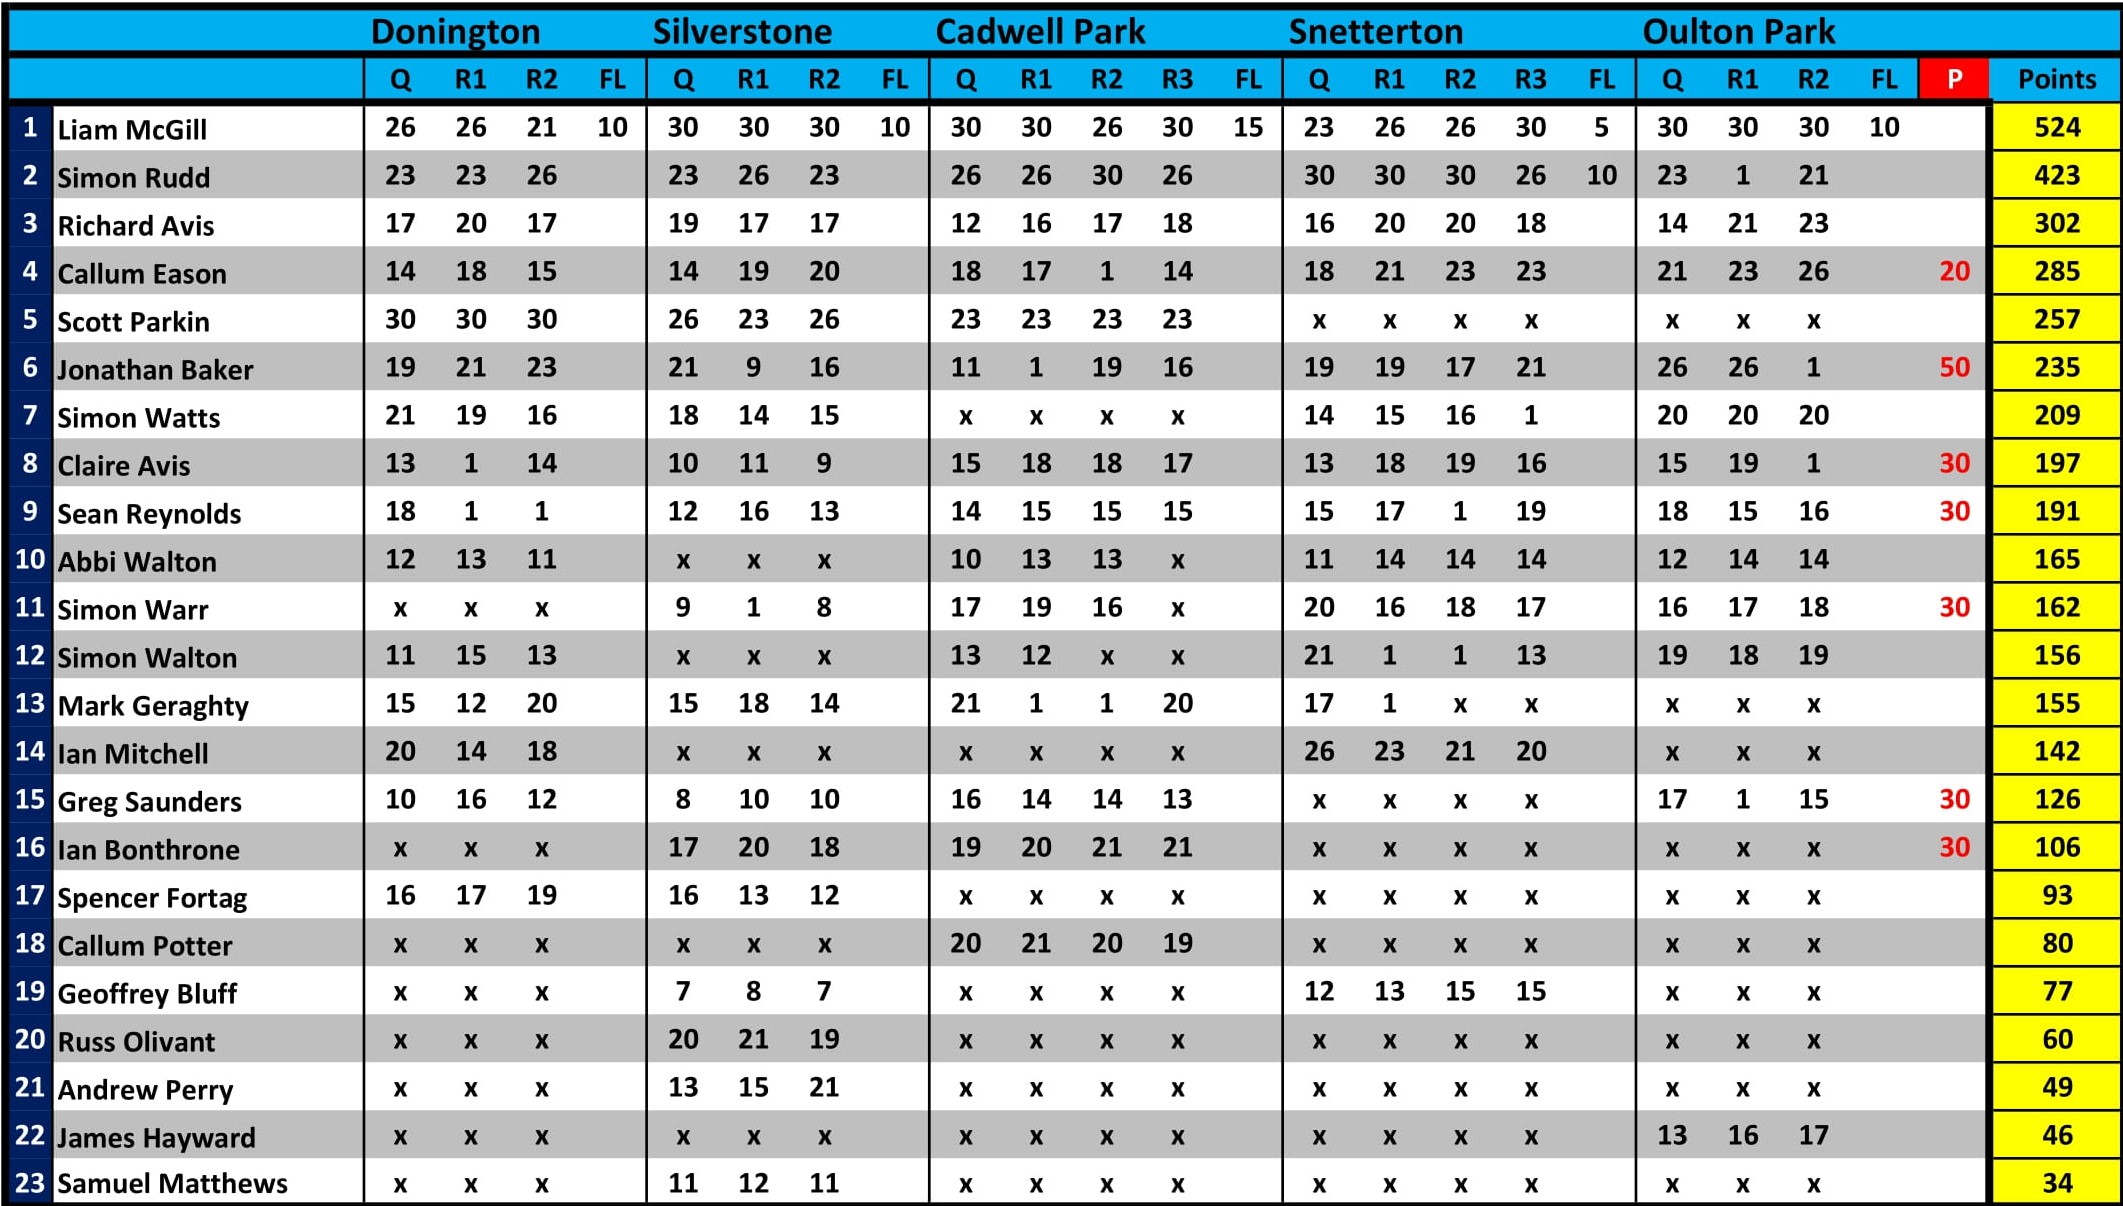 Points Table After Round 5 At Oulton Park